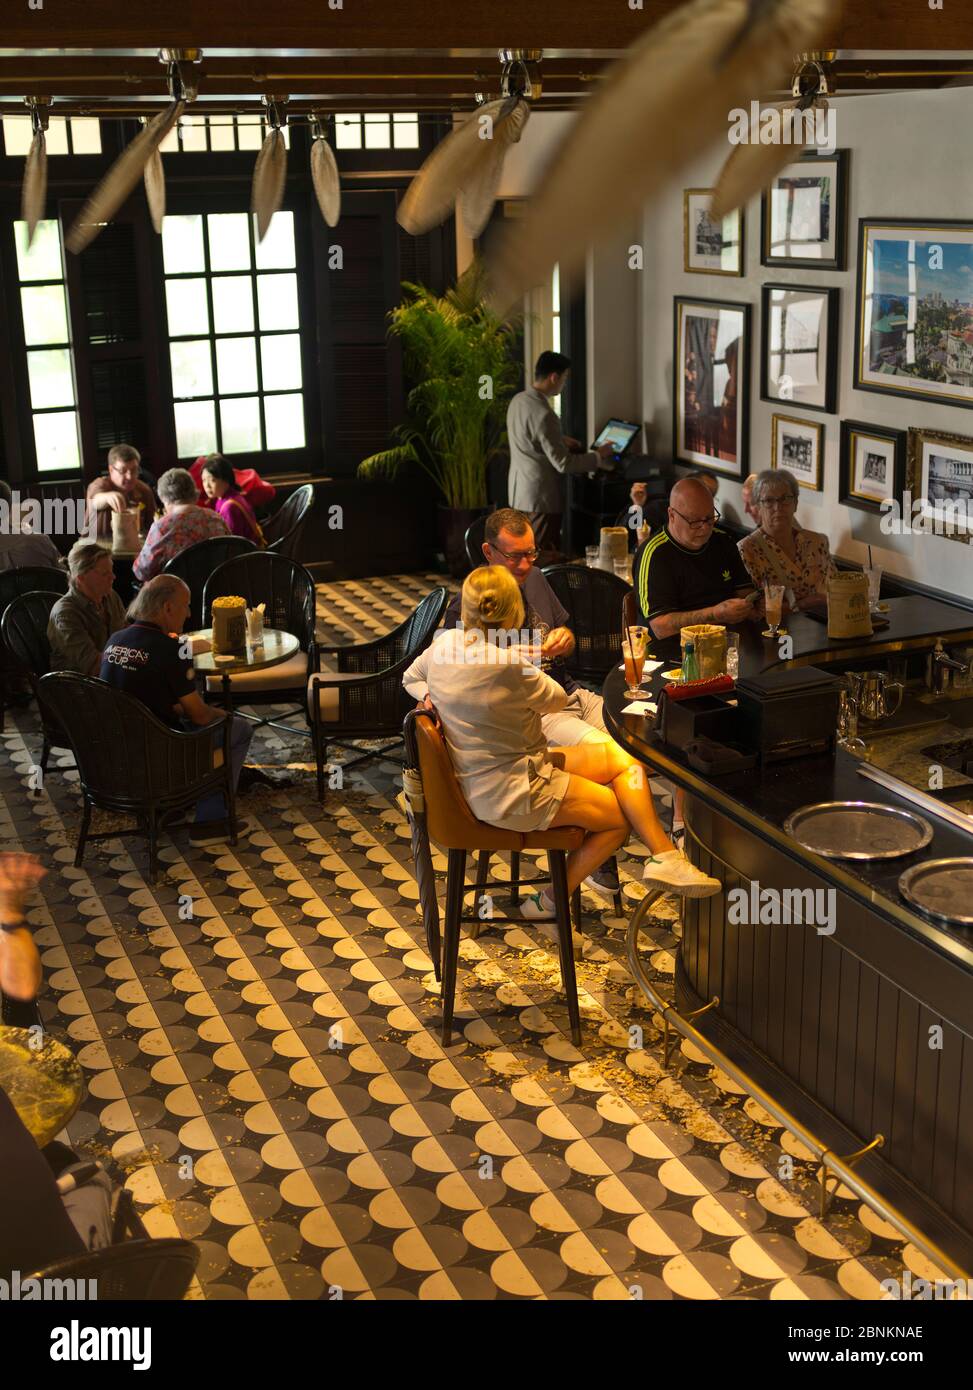 dh Long bar RAFFLES HOTEL SINGAPORE ASIA Tourist people relaxing with drinks pub Stock Photo